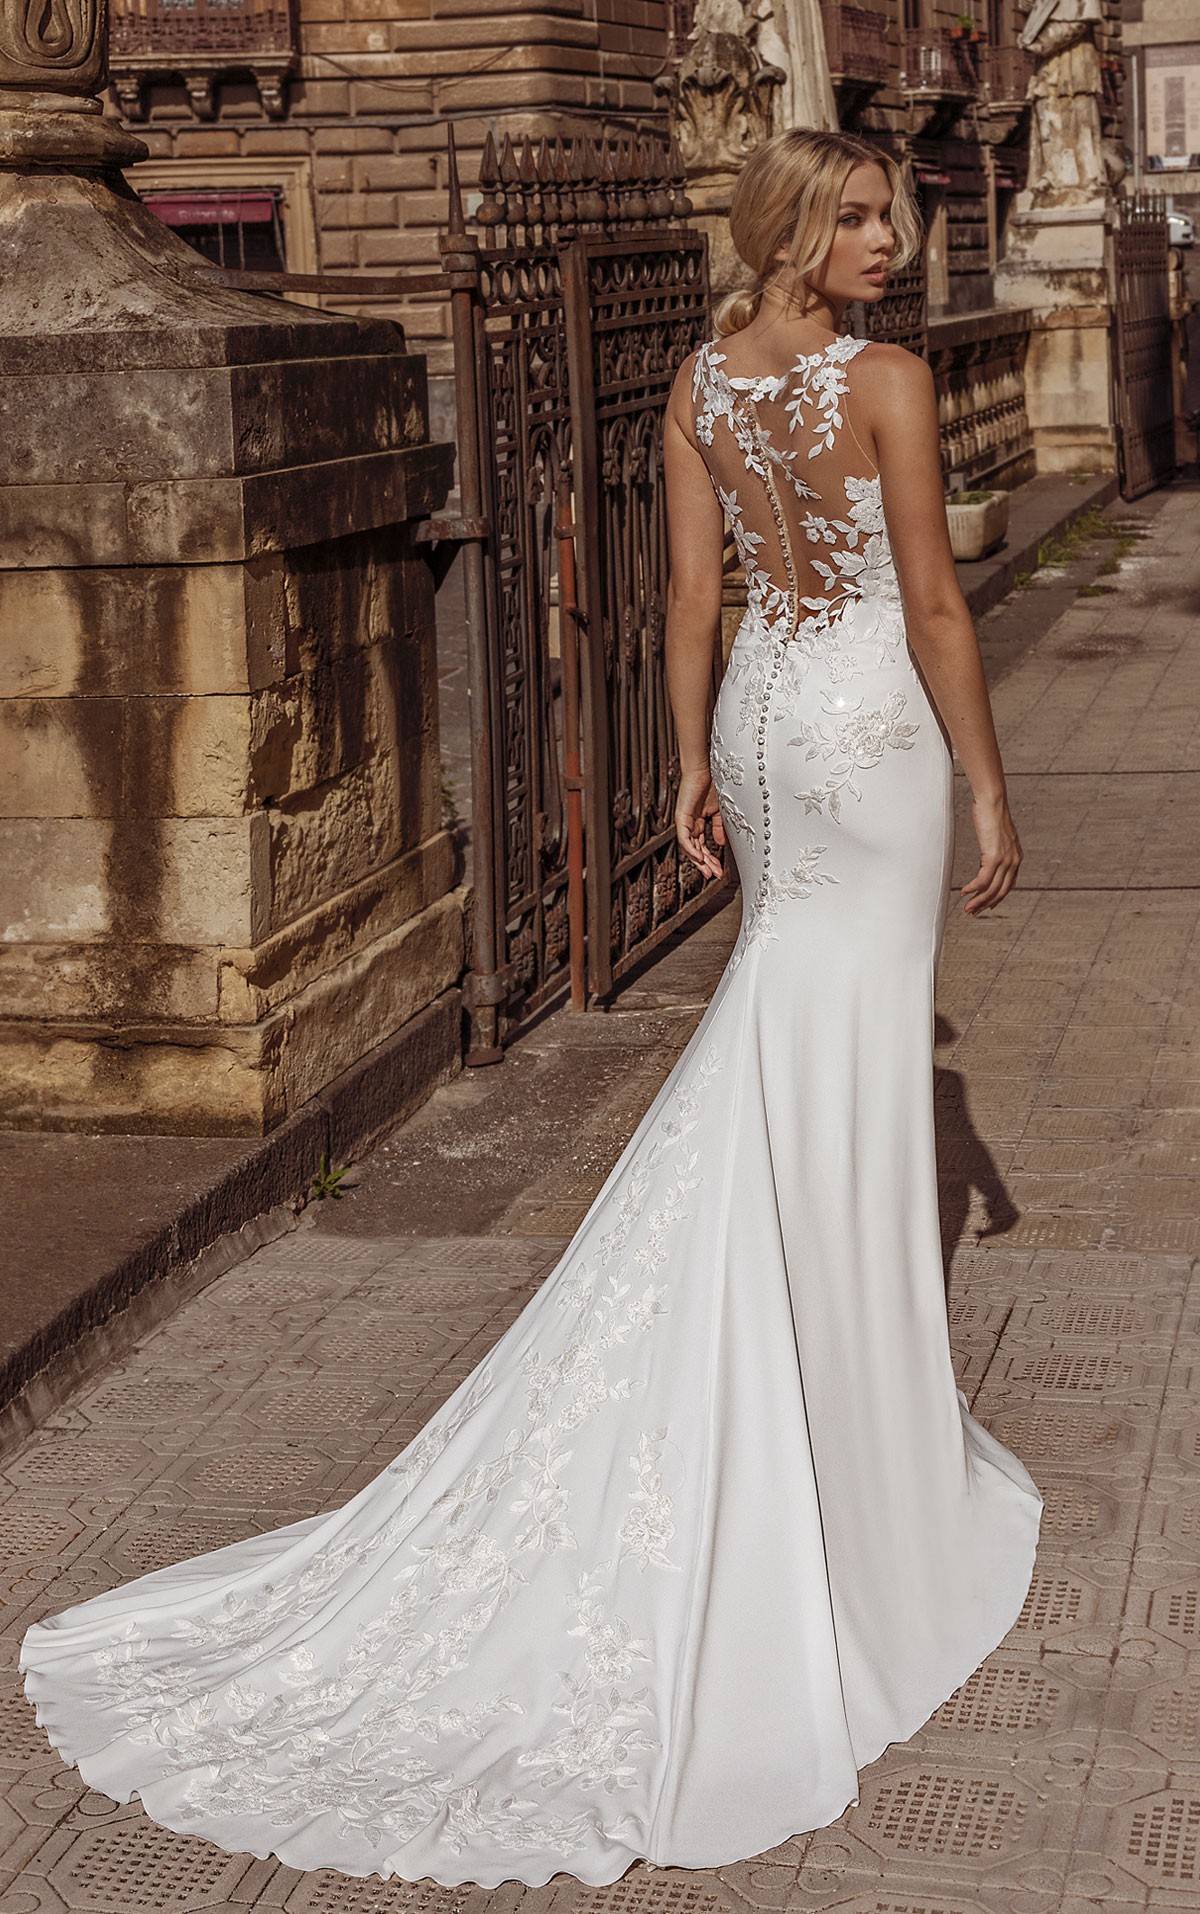 Rosario - Size 16 - Modeca #Rosario - simple crepe wedding dress with V neckline & tattoo lace back - Blessings Bridal Boutique, Westdene, Brighton. East Sussex. BN1 5GG T: 01273 505766 E: info@blessingsbridal.co.uk